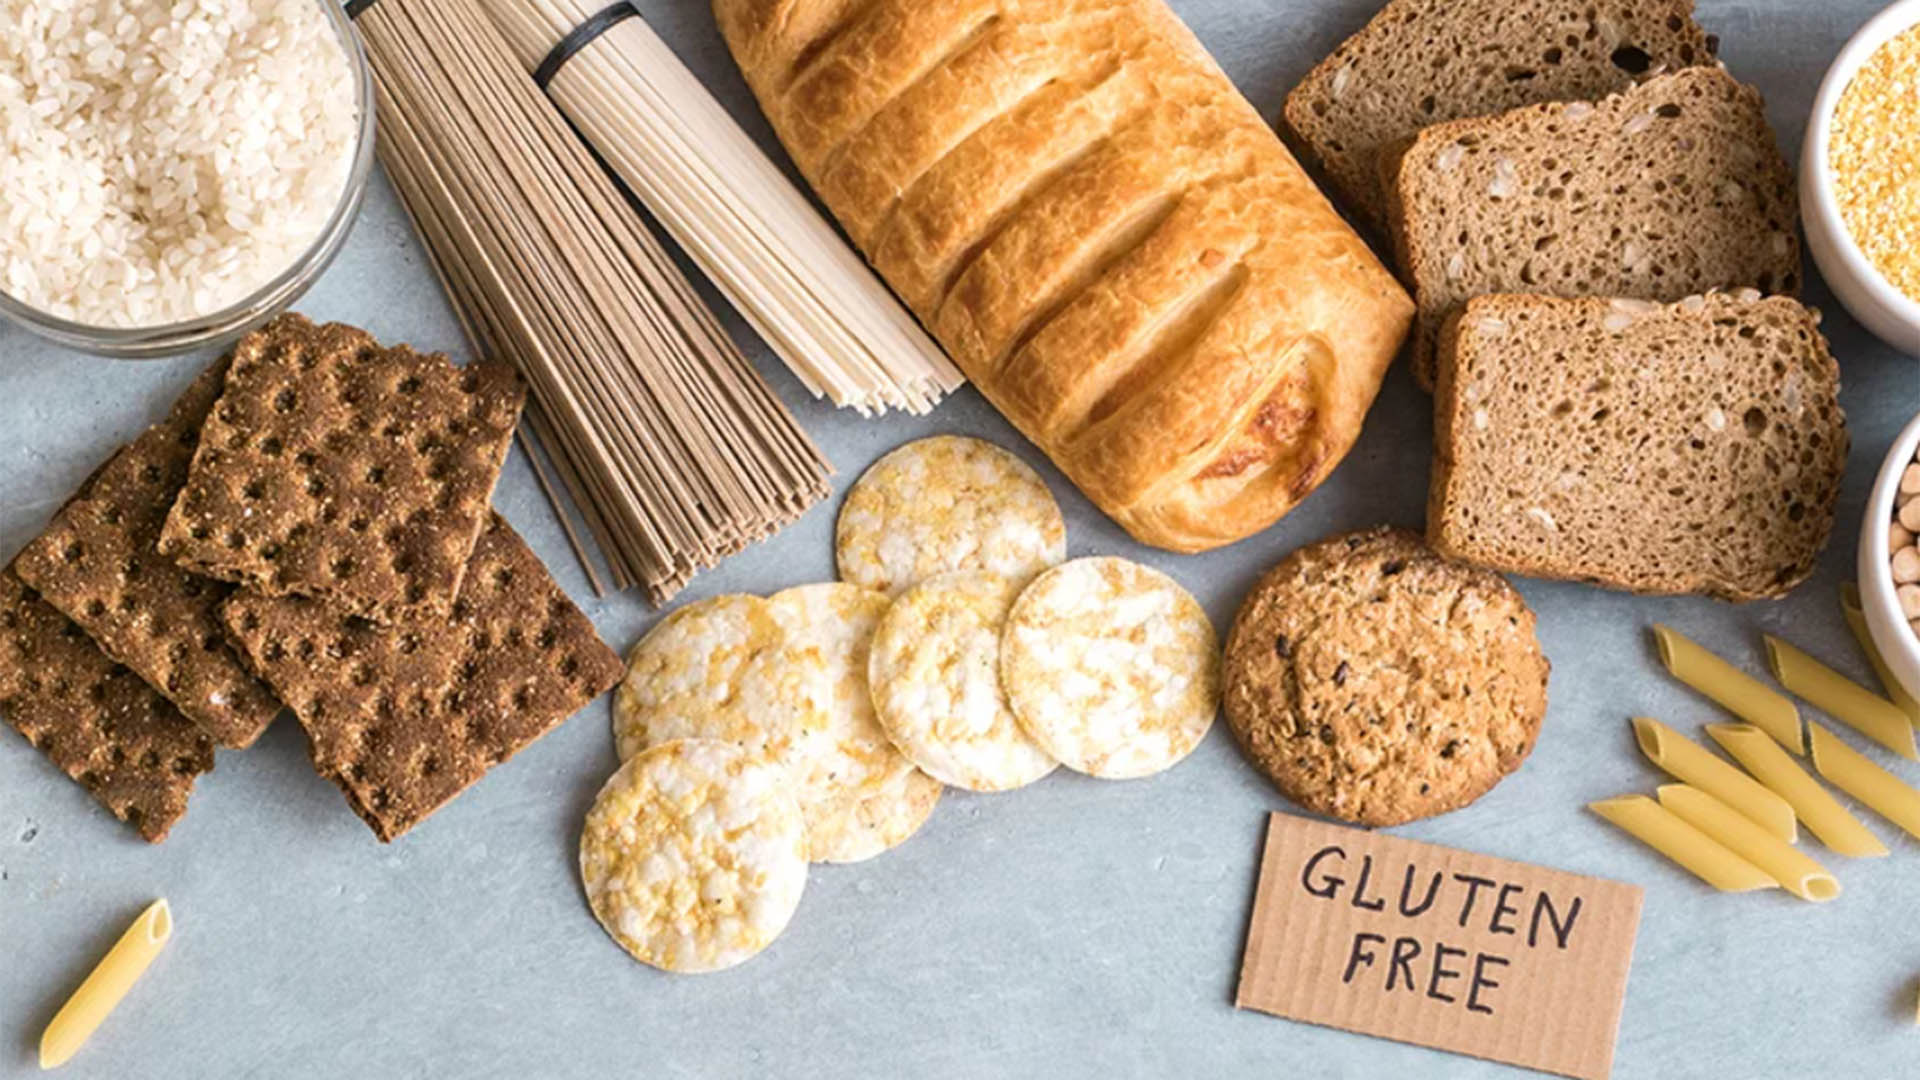 a photo showing a range of carbohydrates such as bread, crackers and pasta with a small sign reading "gluten free"